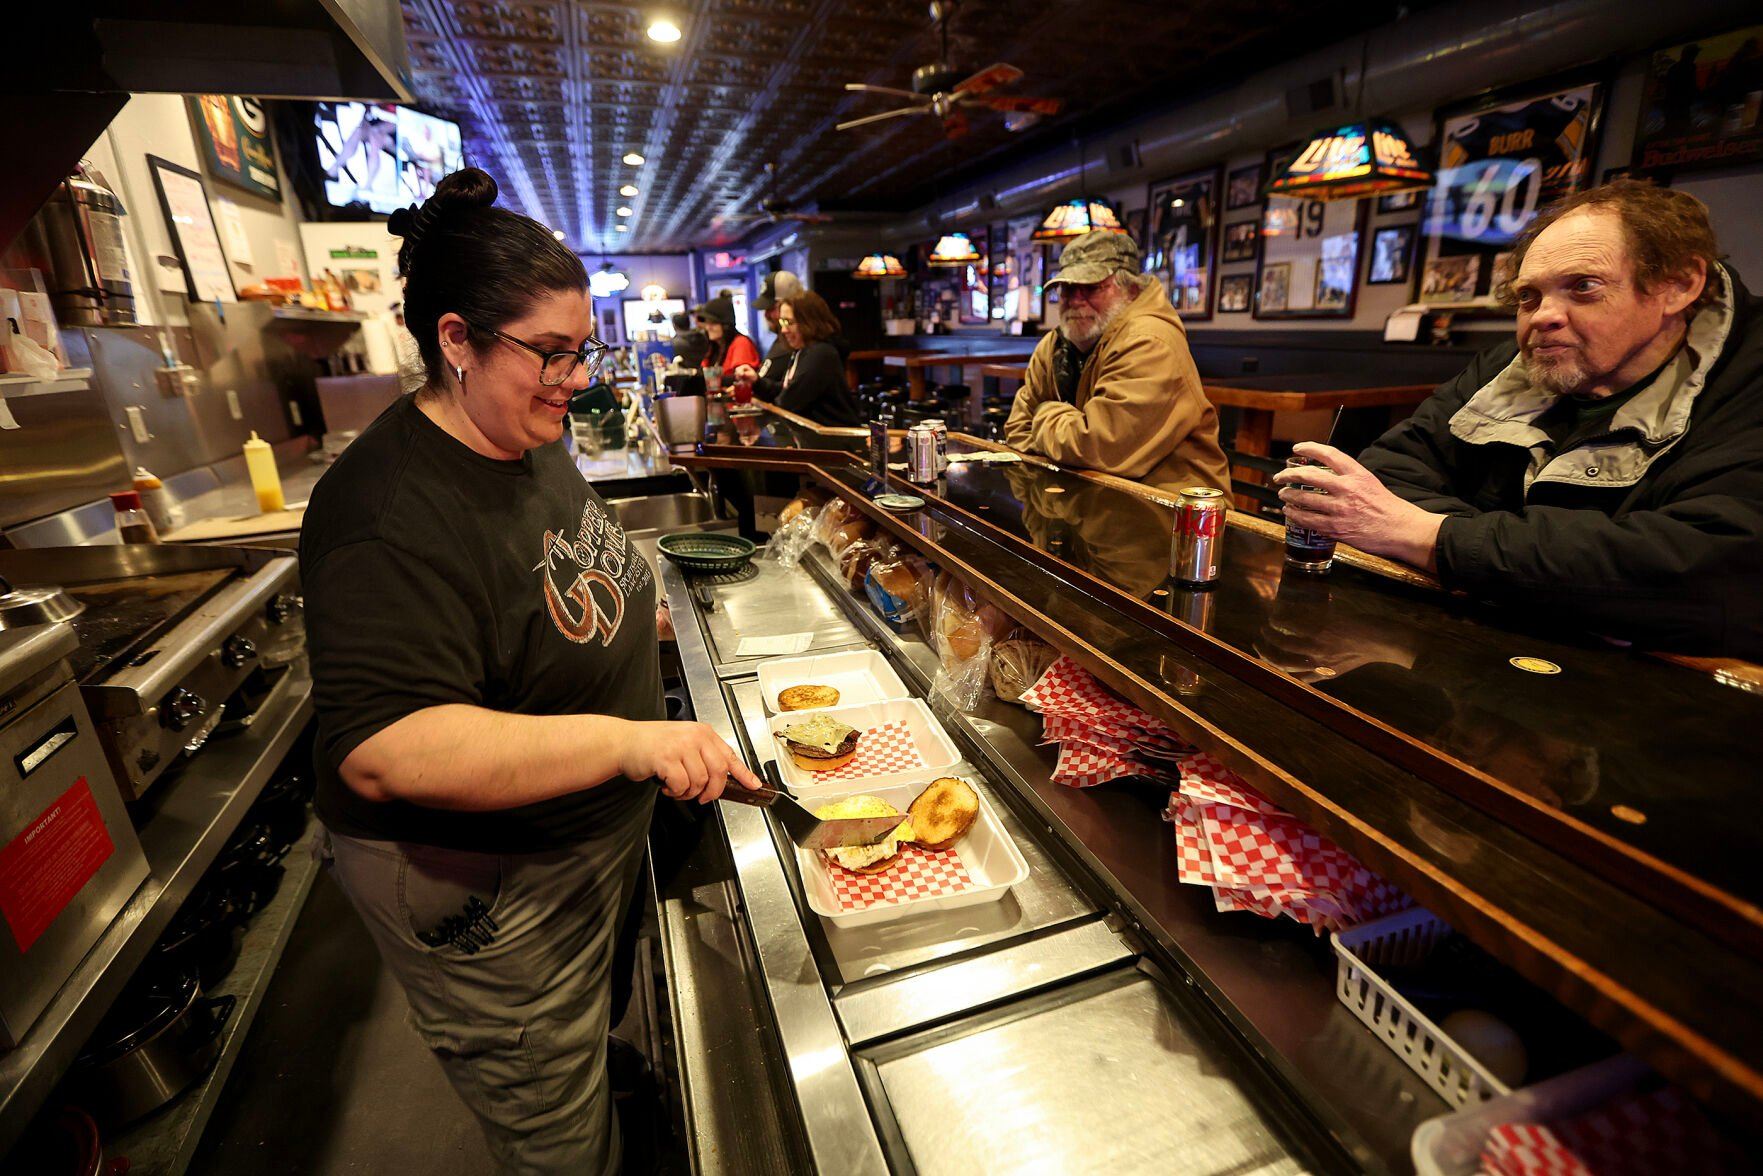 Danielle Schoenfeld works on a food order at The Dome Sports Bar in Lancaster, Wis., on Friday.    PHOTO CREDIT: Dave Kettering